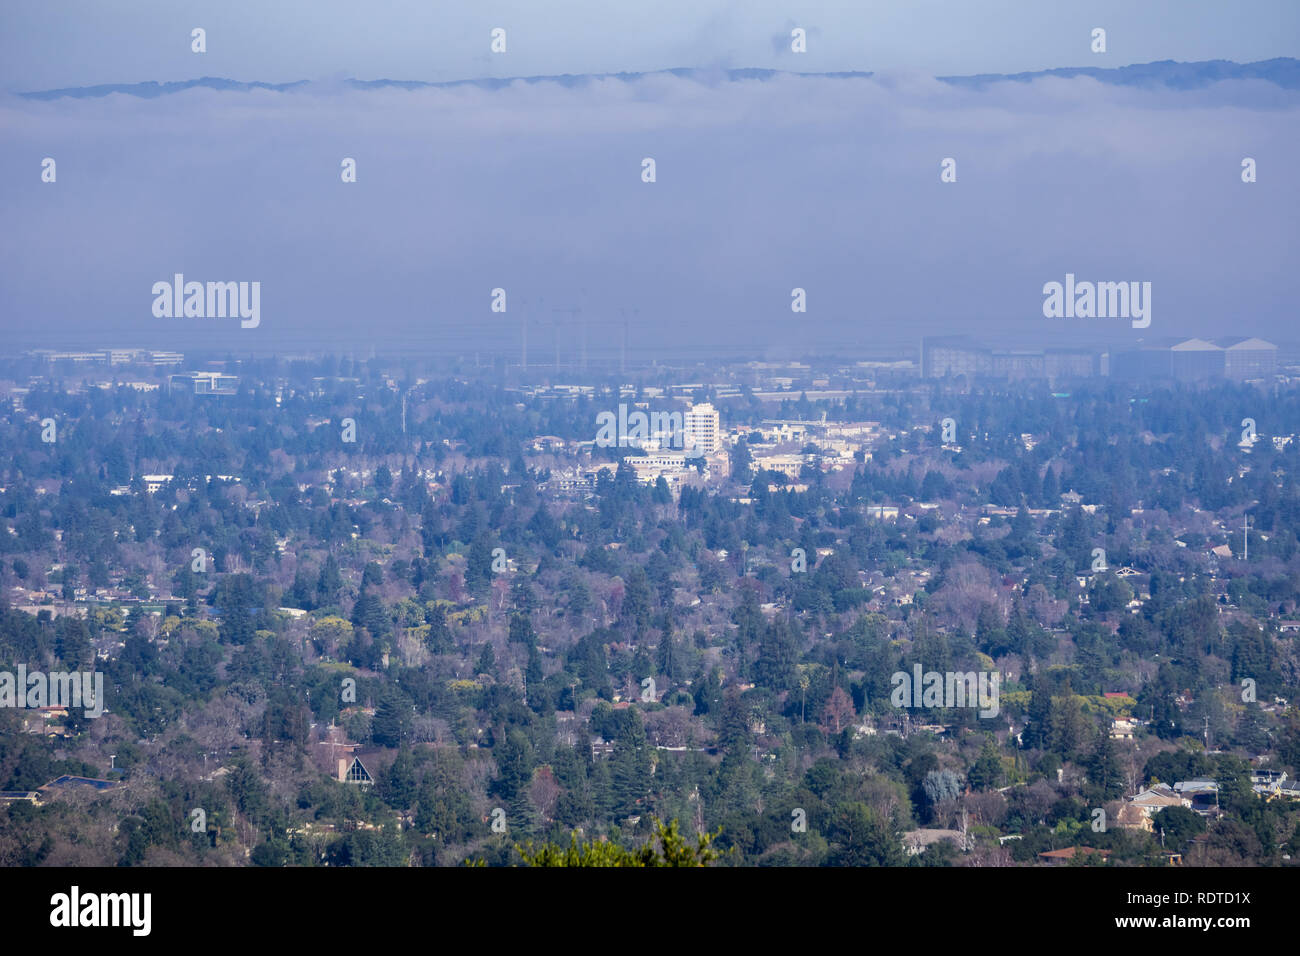 Aerial view of Mountain View and Los Altos covered by a layer of ...